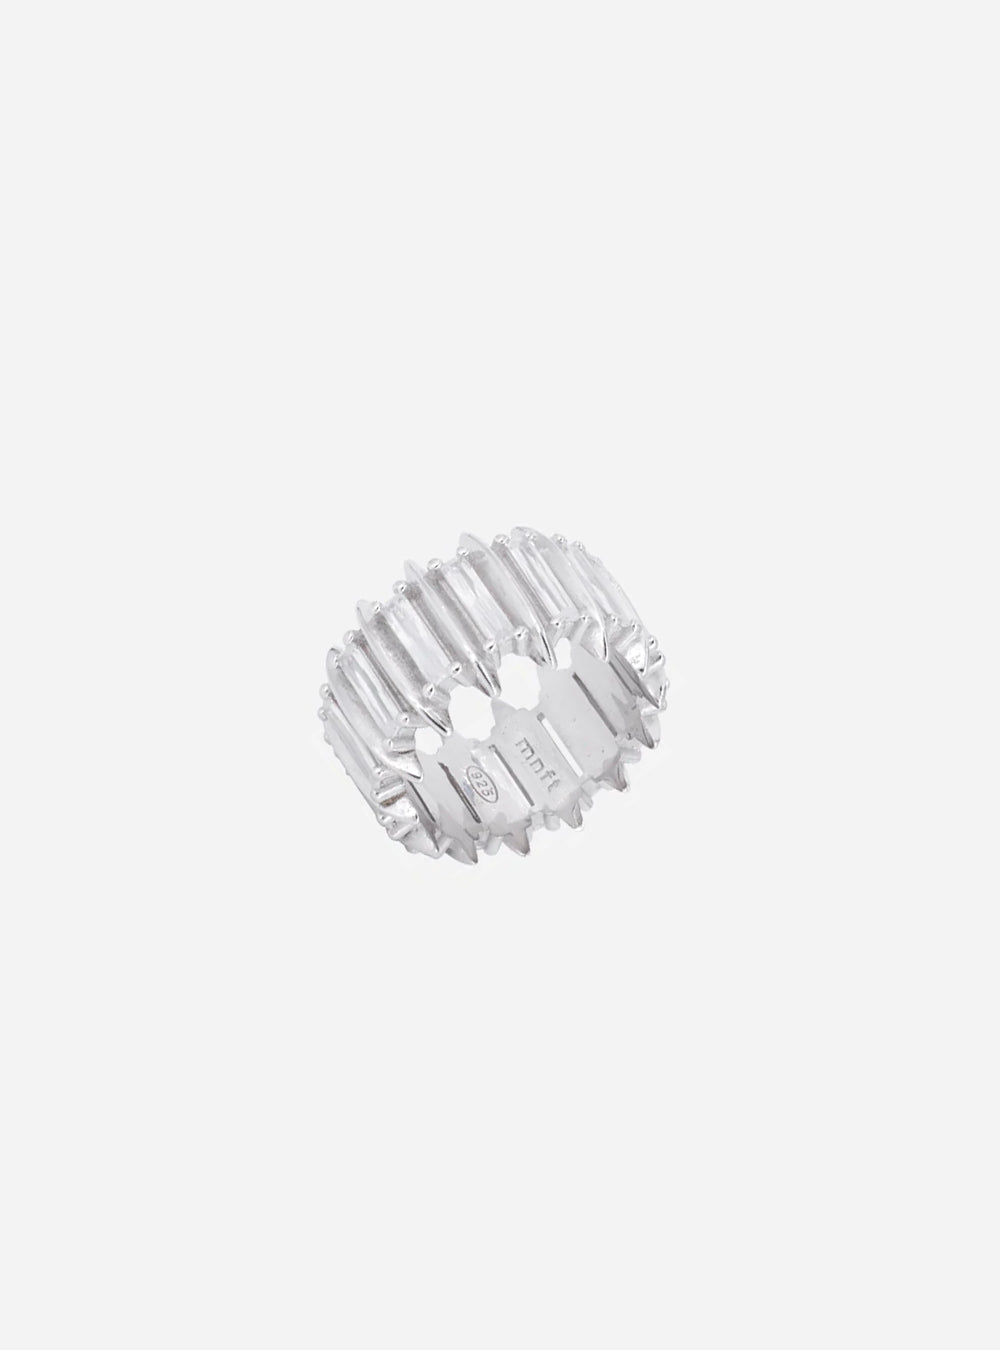 A Talon eternity ring by MIDNIGHTFACTORY on a white background.